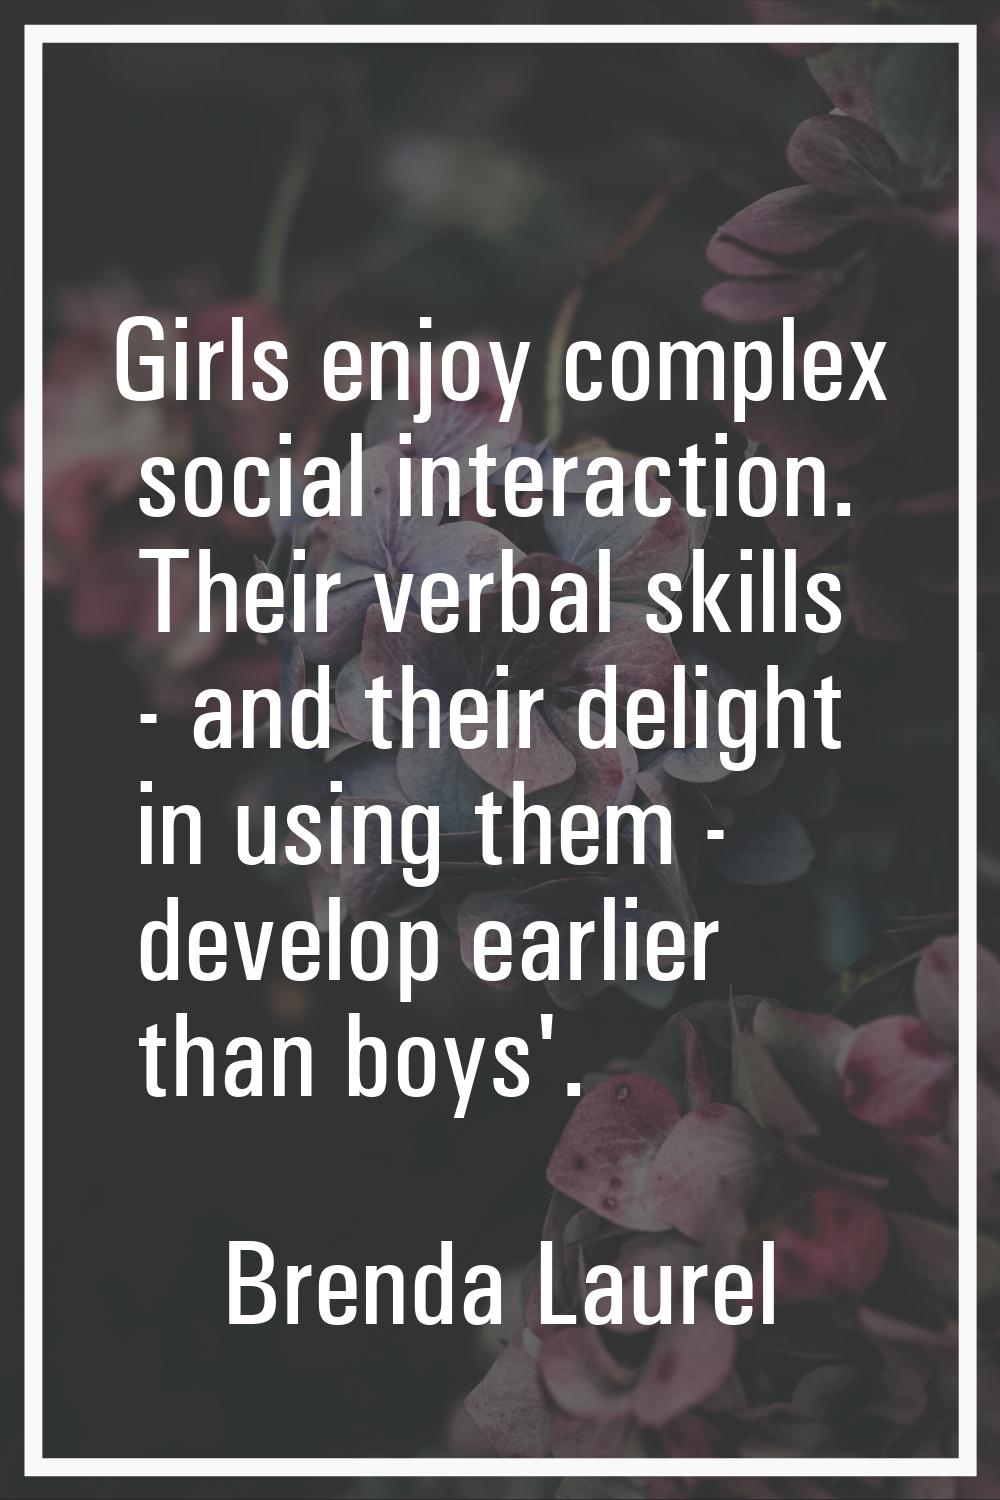 Girls enjoy complex social interaction. Their verbal skills - and their delight in using them - dev